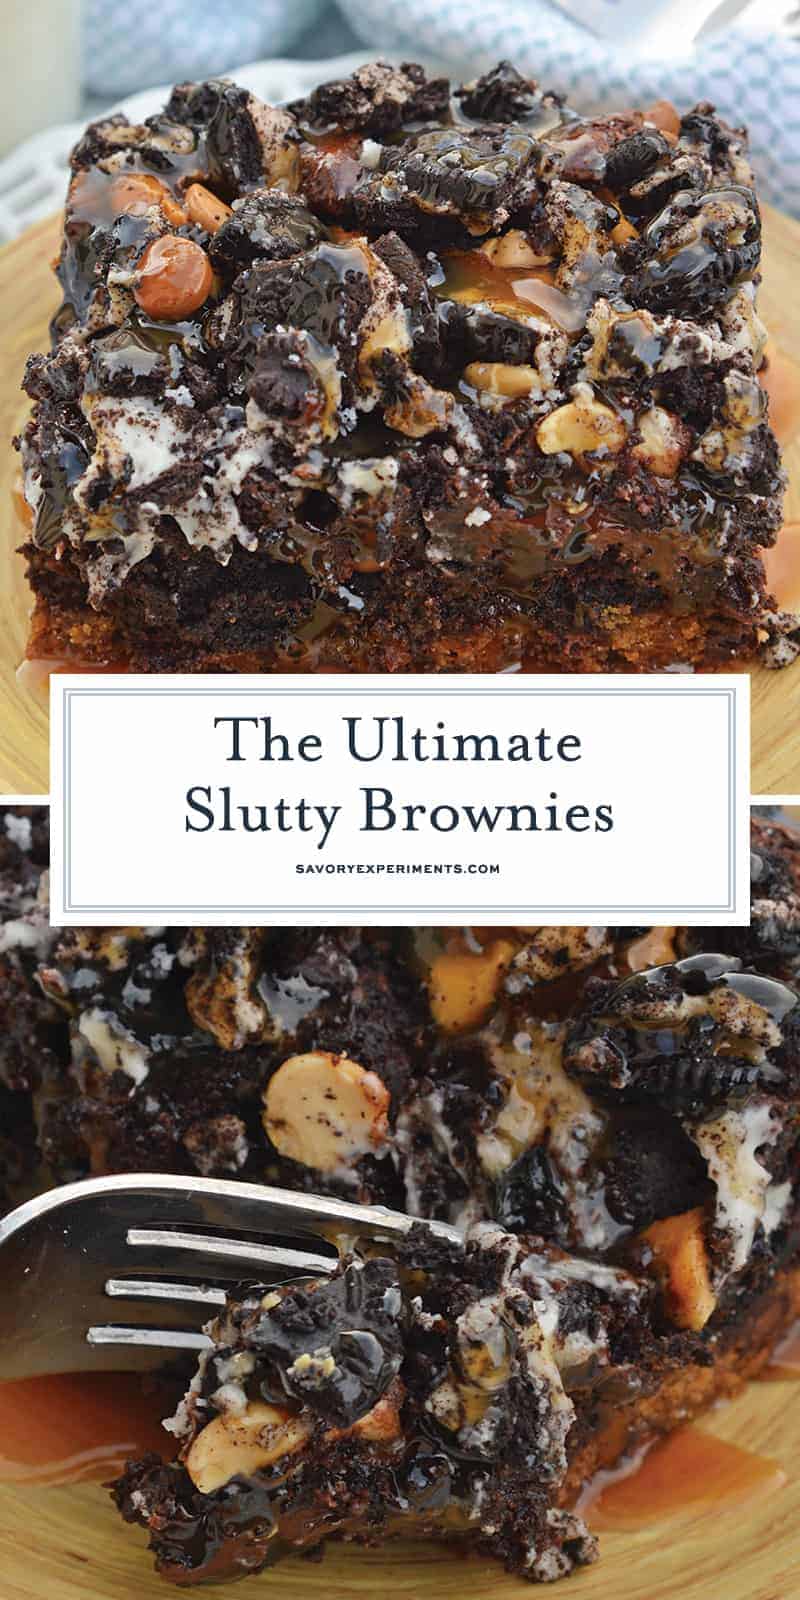 The Ultimate Slutty Brownies are layers of chocolate chip cookie dough, brownie, Oreo cookies, caramel and sea salt. The perfect decadent, sweet and salty easy dessert recipe. #sluttybrownies #bestbrownierecipe #homemadebrownies www.savoryexperiments.com